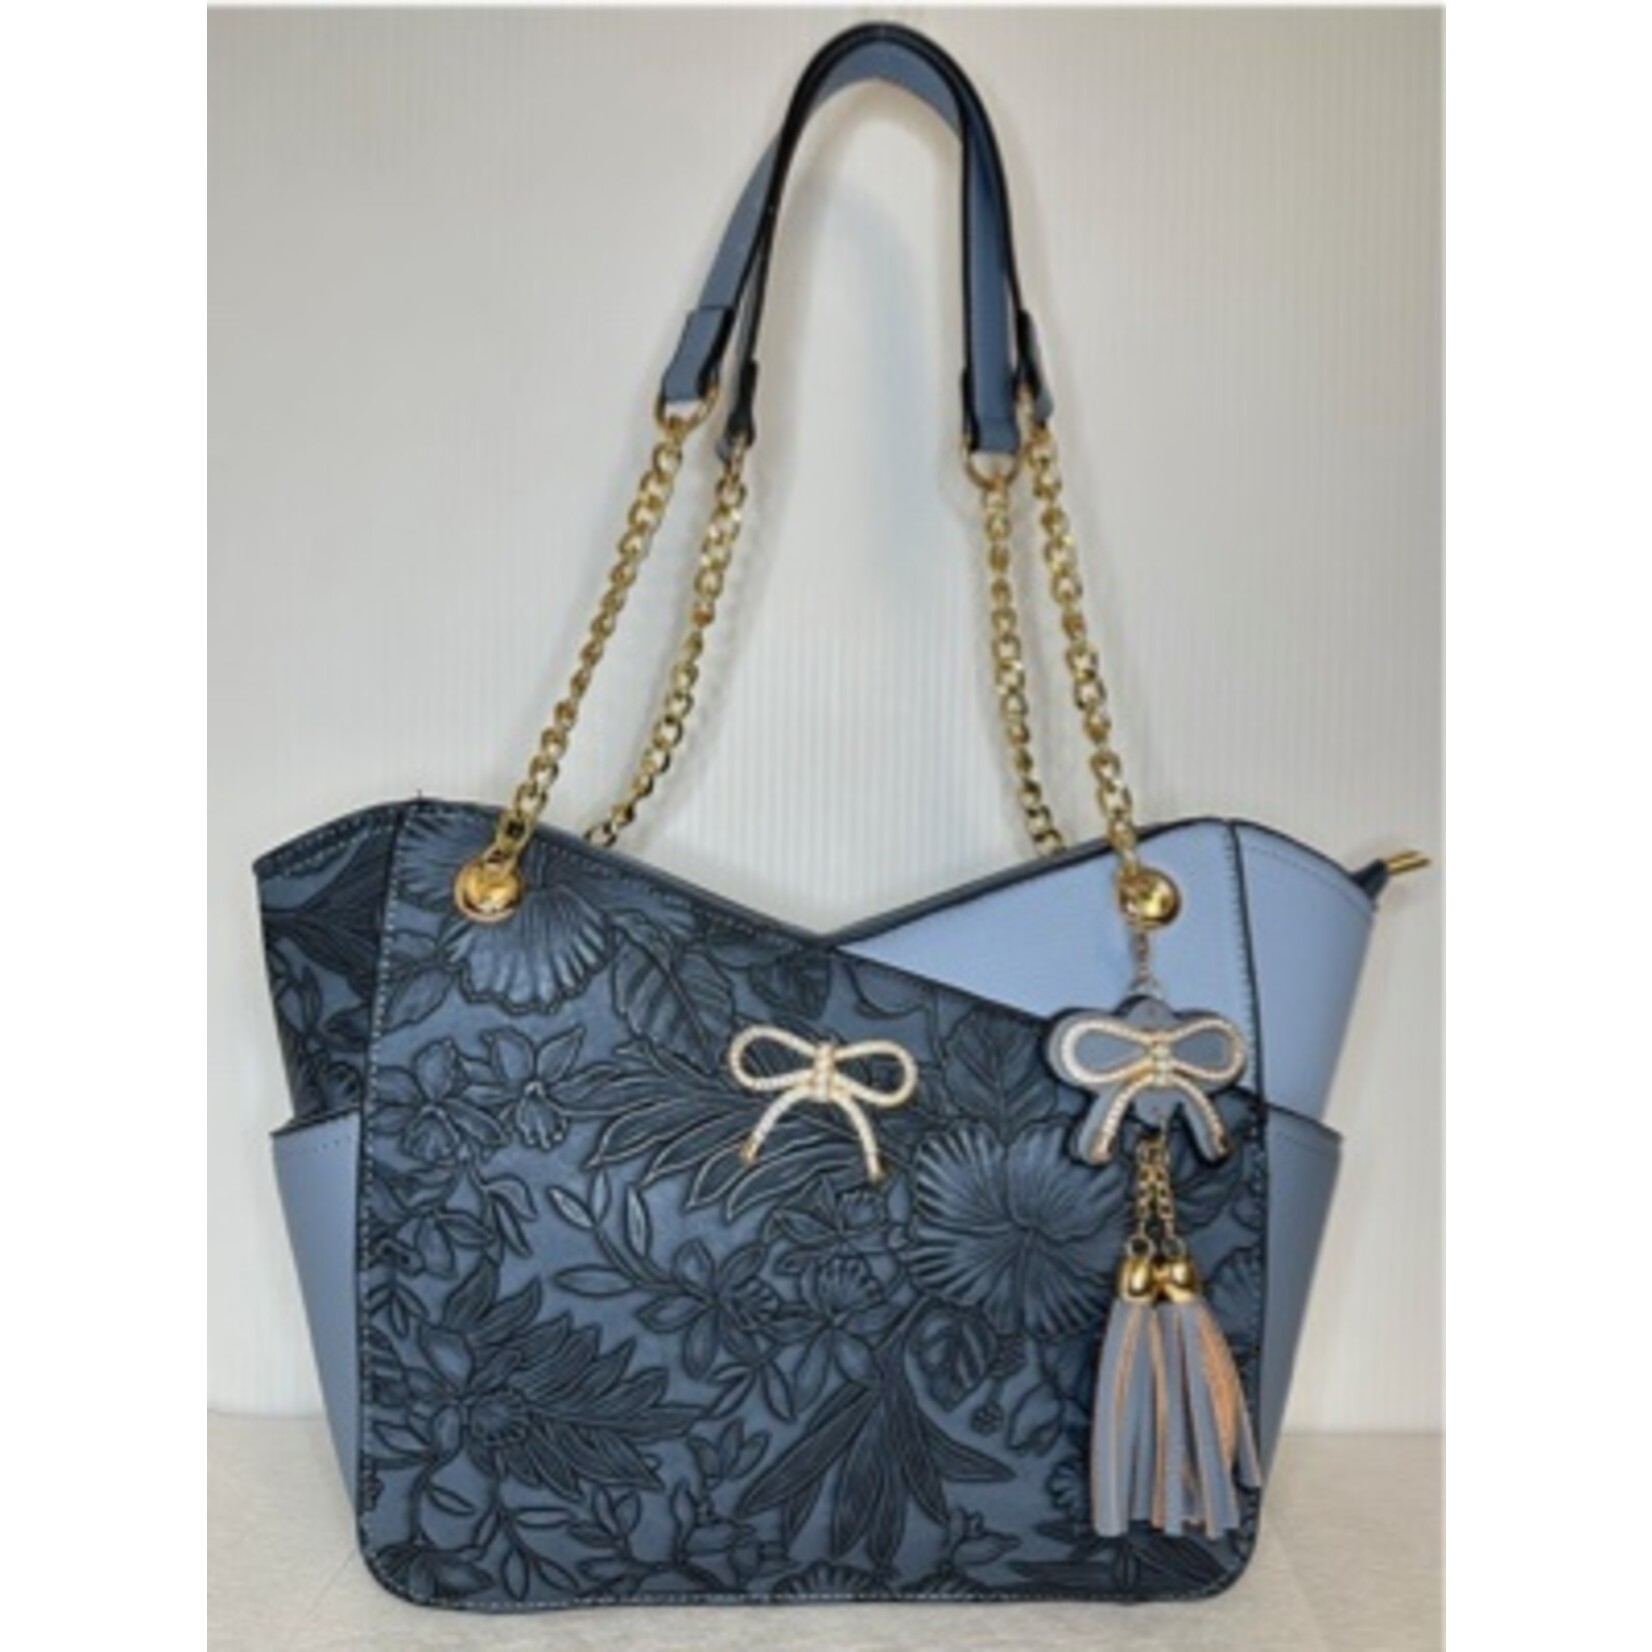 temptation Small 2 tone tote w/bow on front and extra strap for crossbody